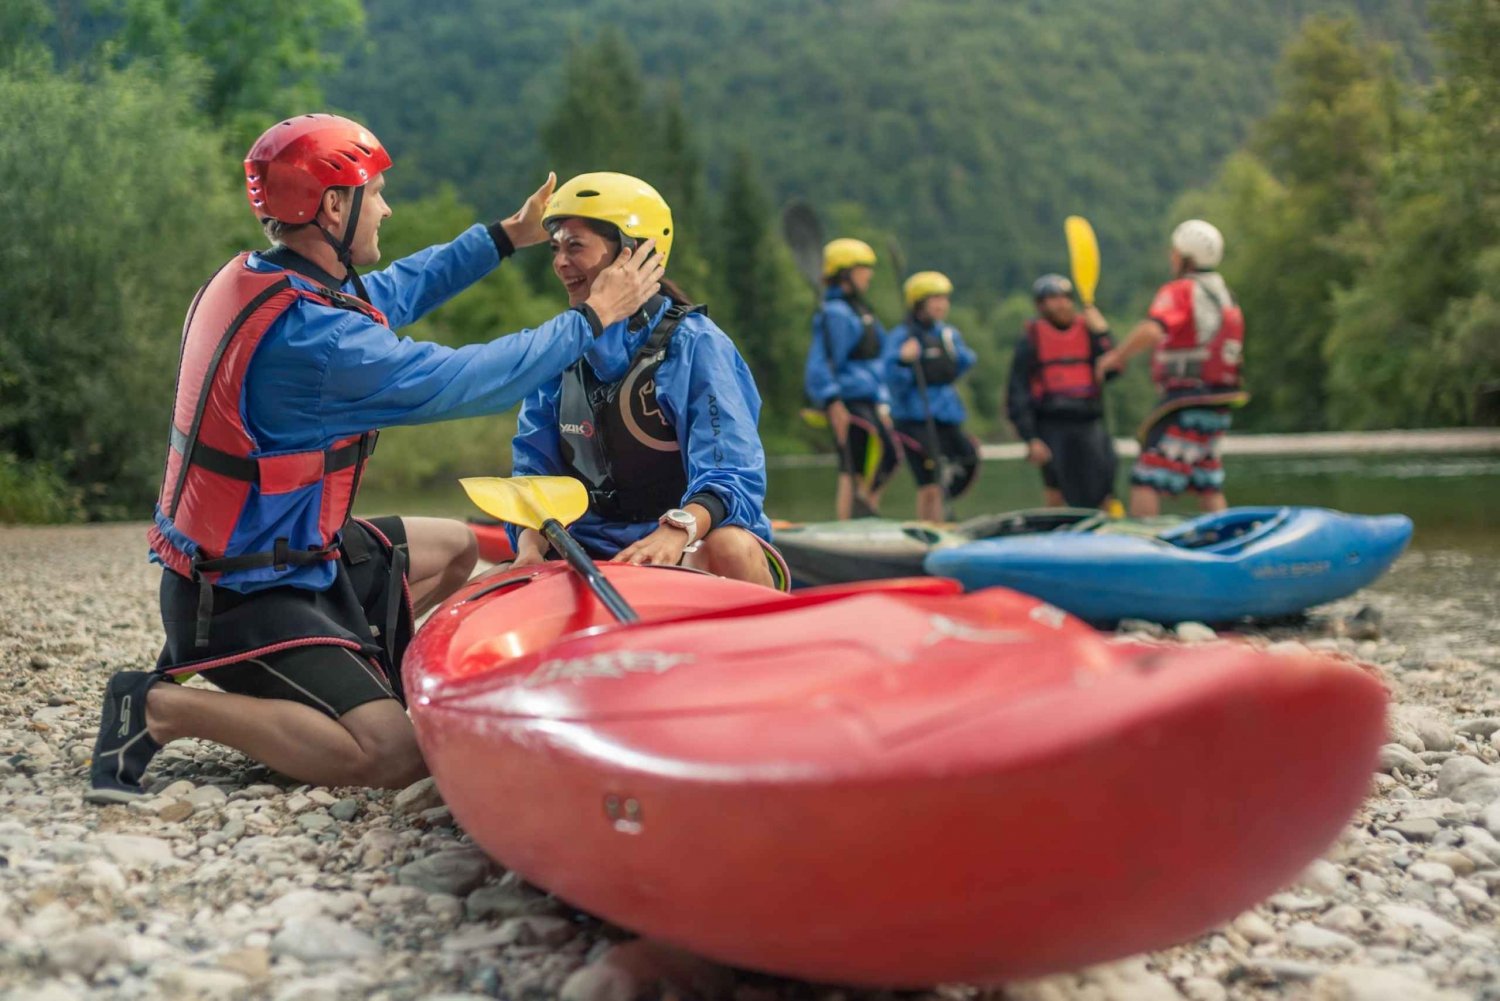 From Bled: Sava River Kayaking Adventure by 3glav